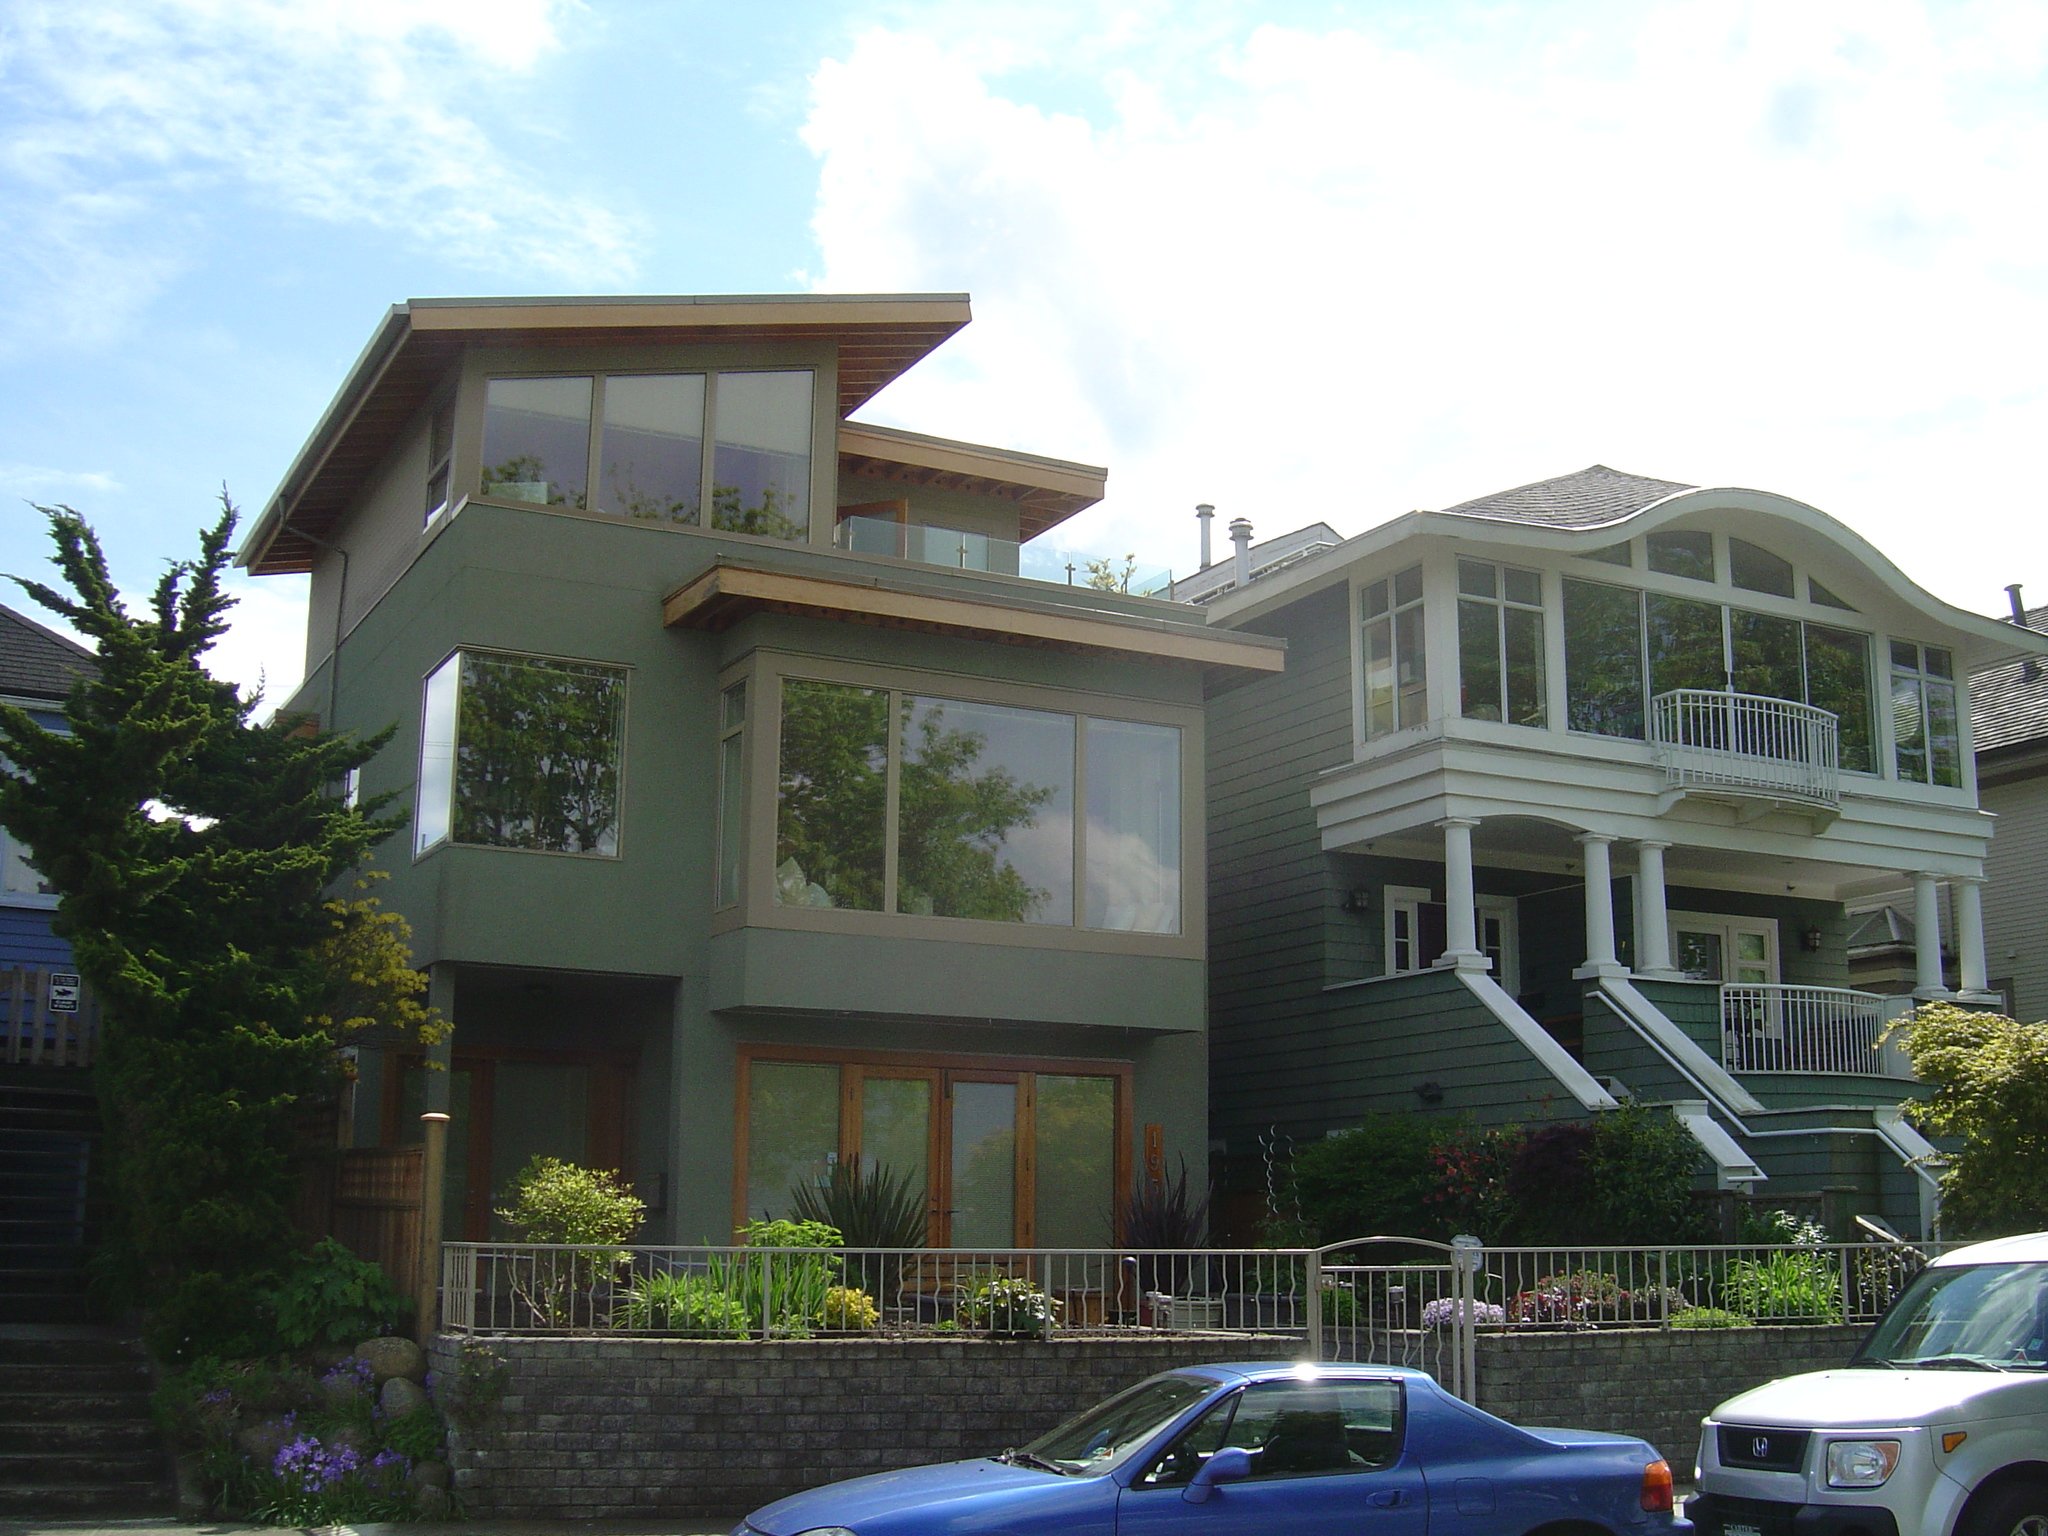 Modern_Vancouver_House_(490844707)